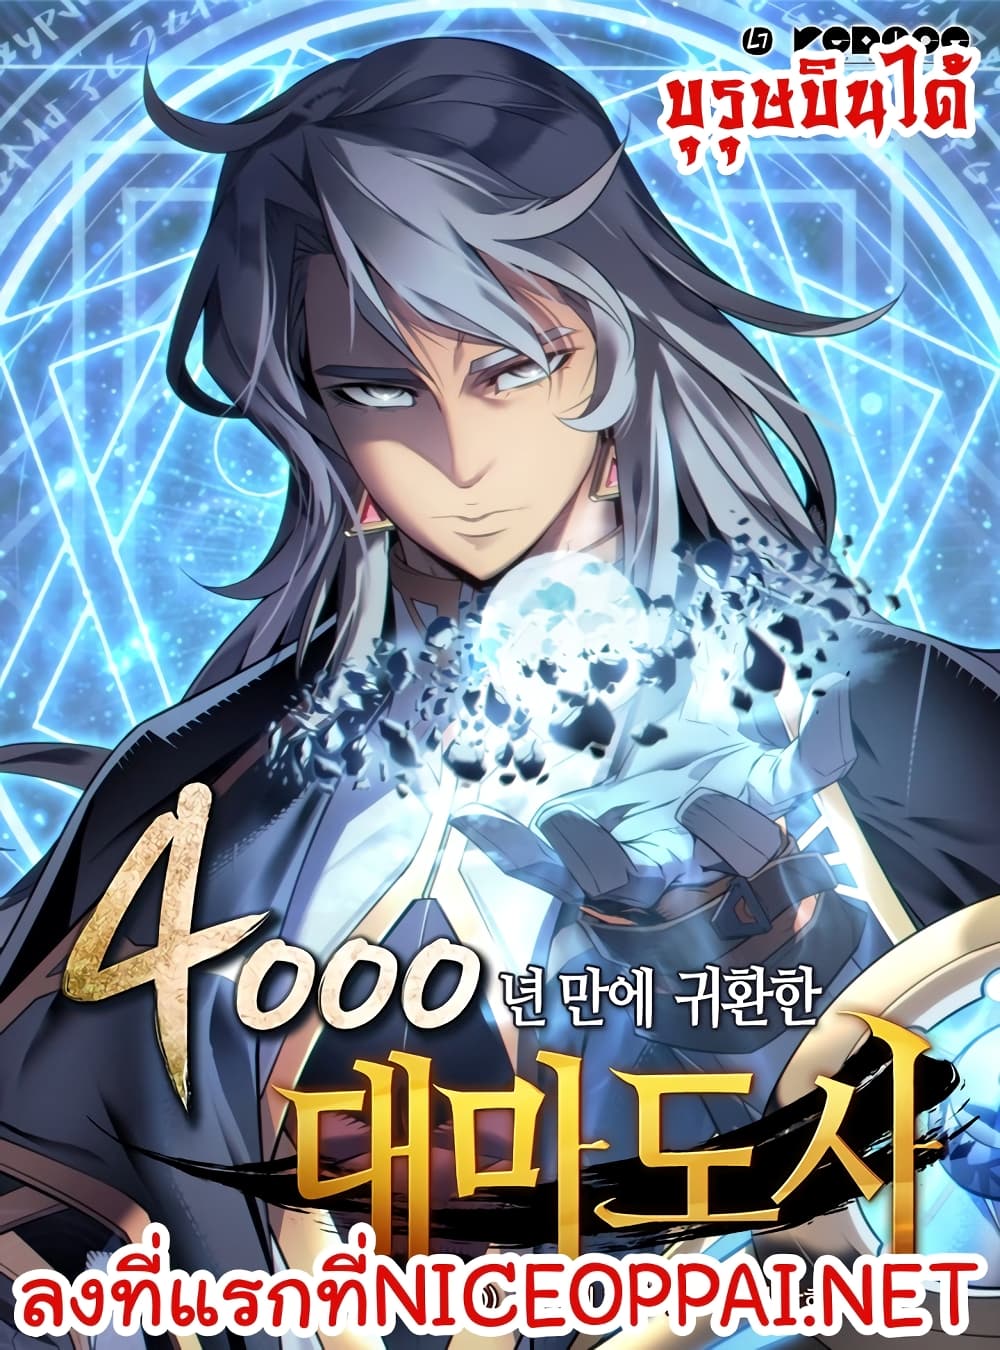 The Great Mage Returns After 4000 Years 44 (1)